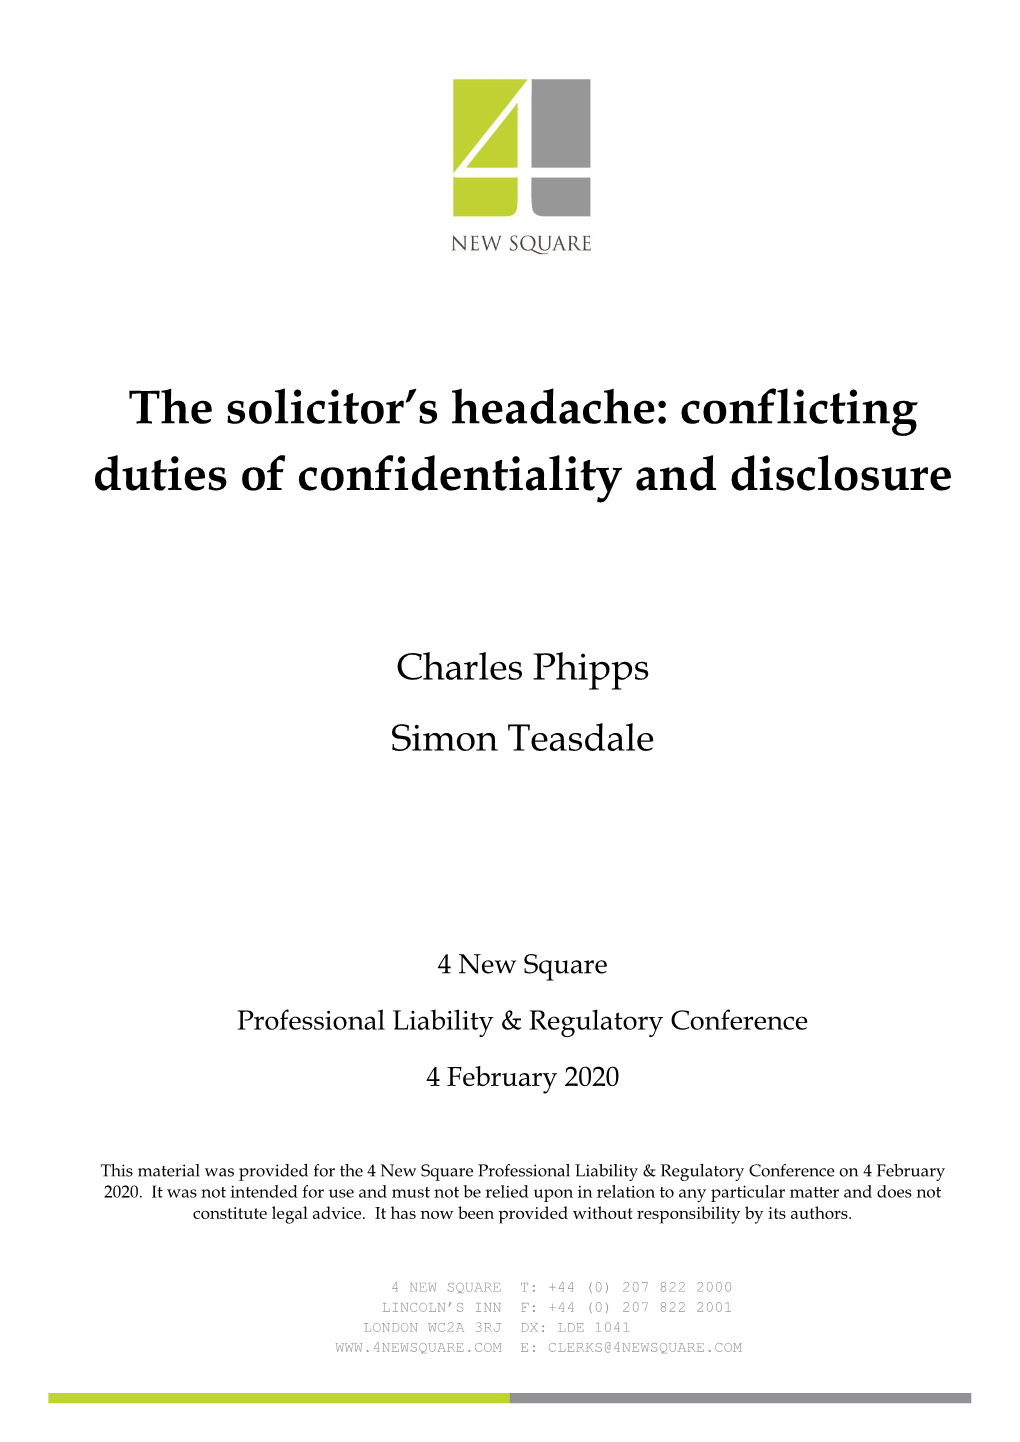 The Solicitor's Headache: Conflicting Duties of Confidentiality and Disclosure